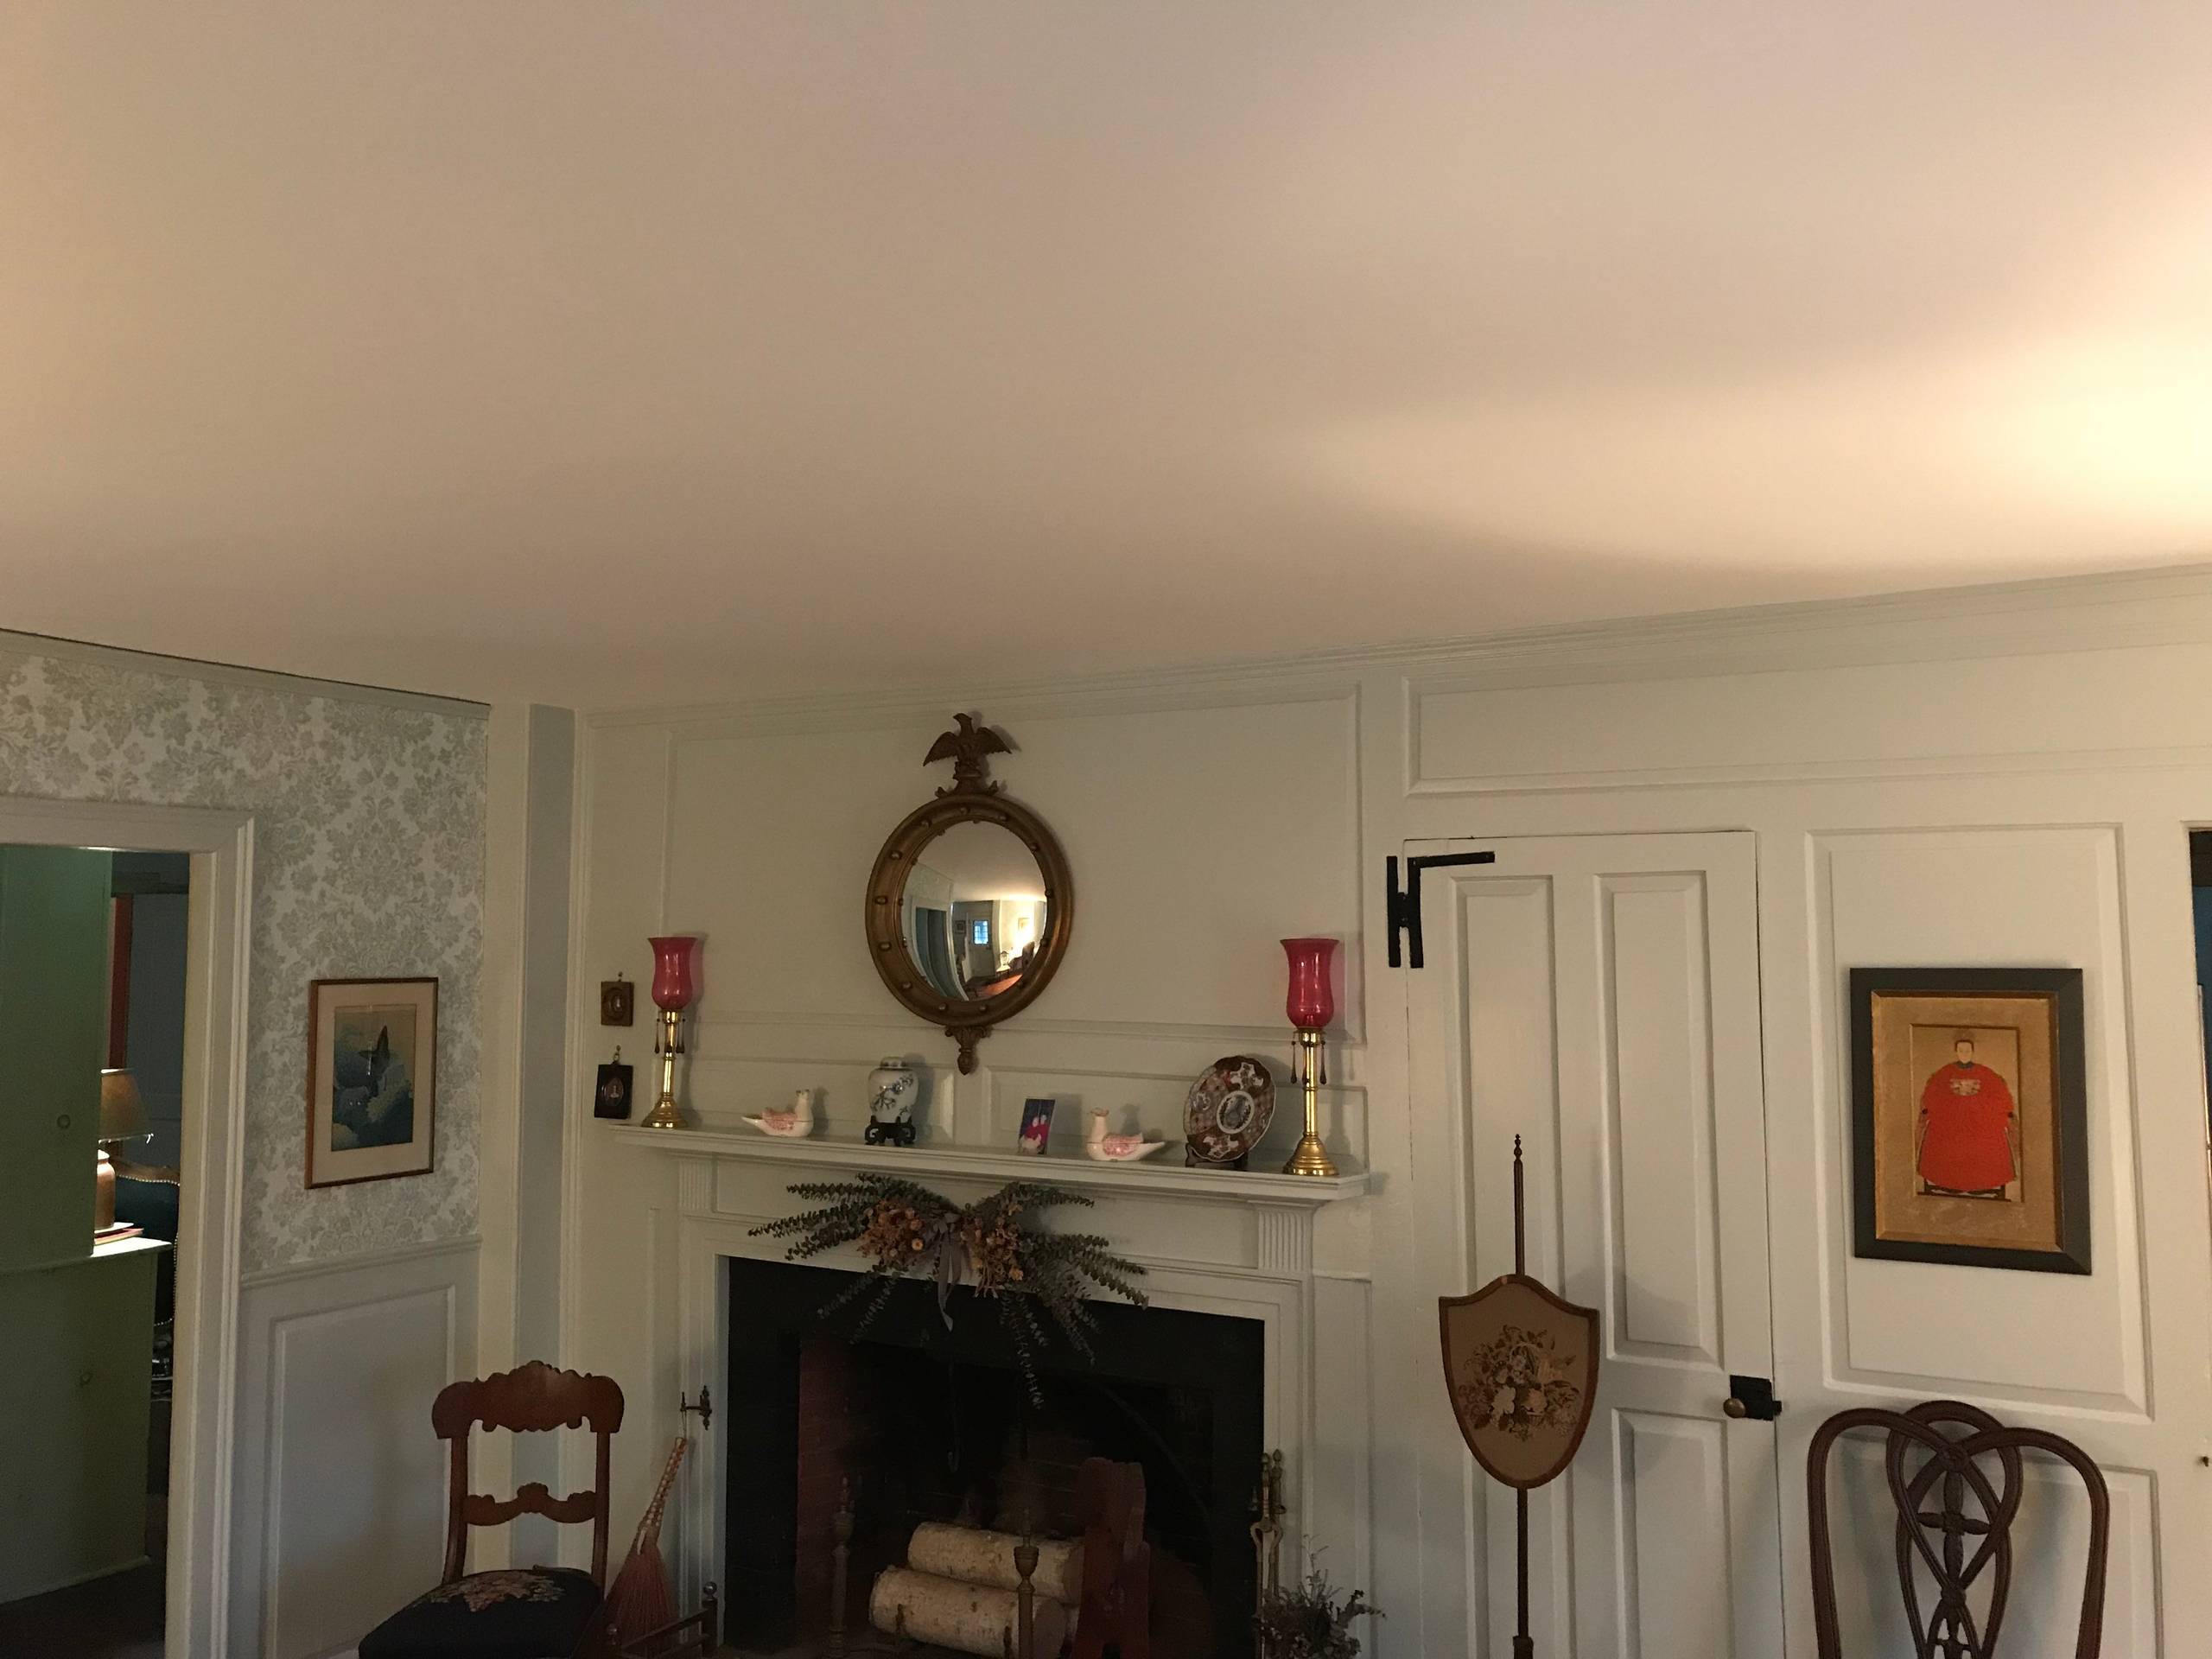 1780's Historic Home Ceiling Repair and Painting Project